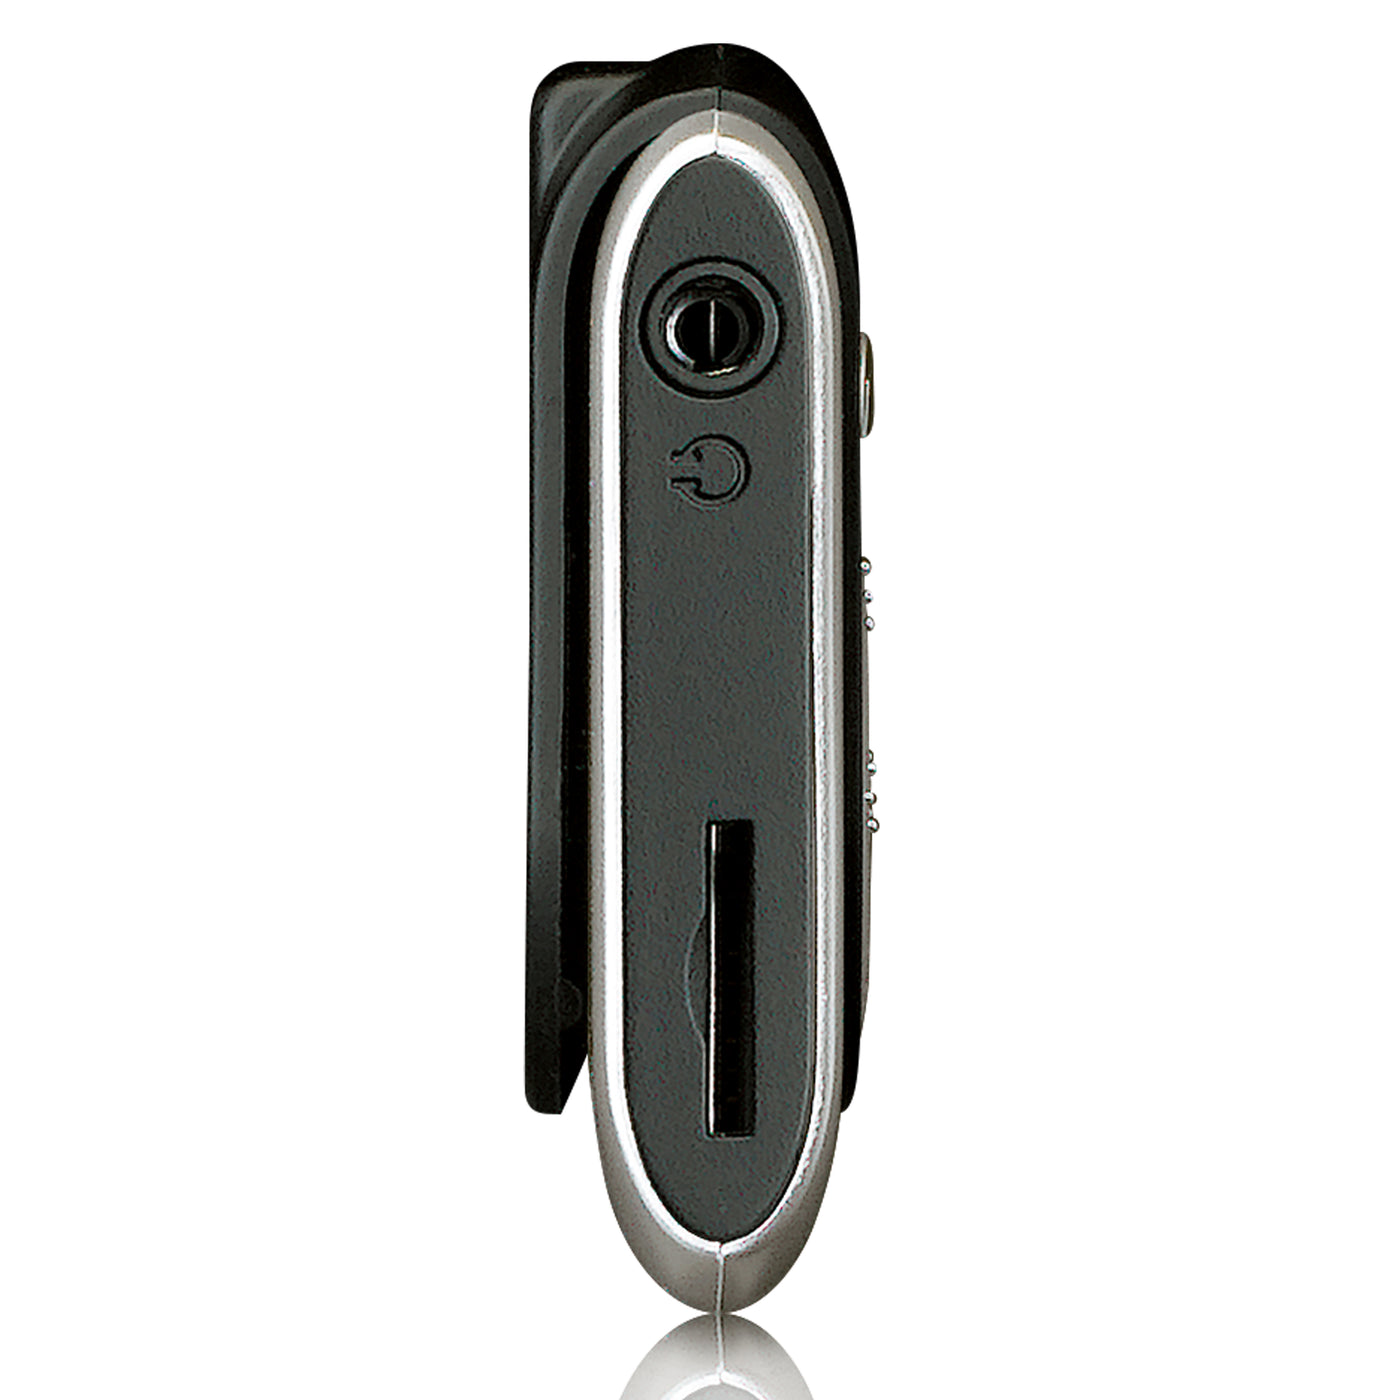 Ices IMP-101SI - Clip MP3 player with SD card slot